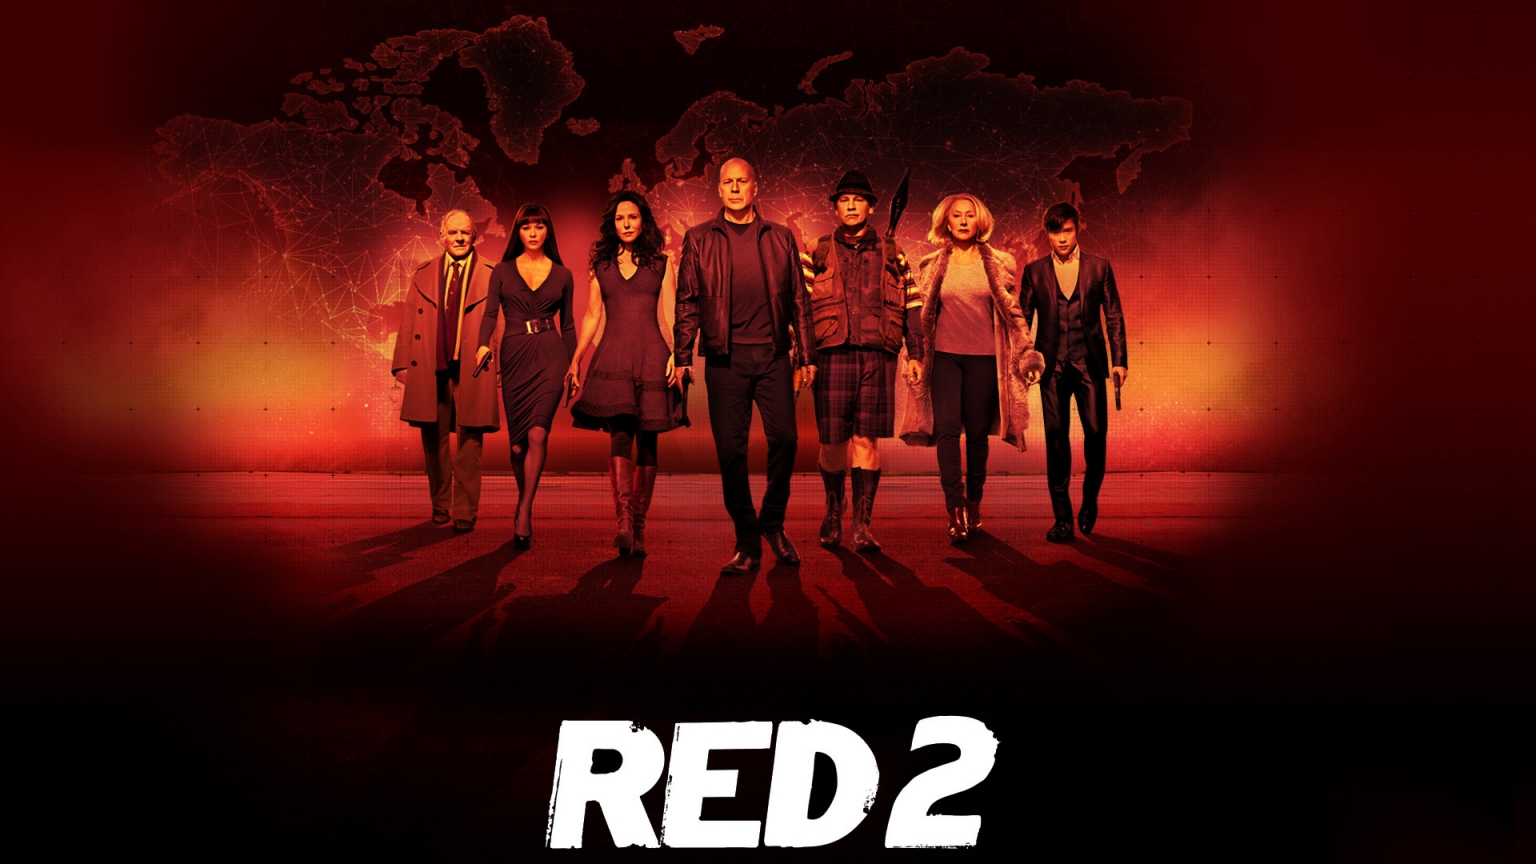 Red 2 Movie for 1536 x 864 HDTV resolution